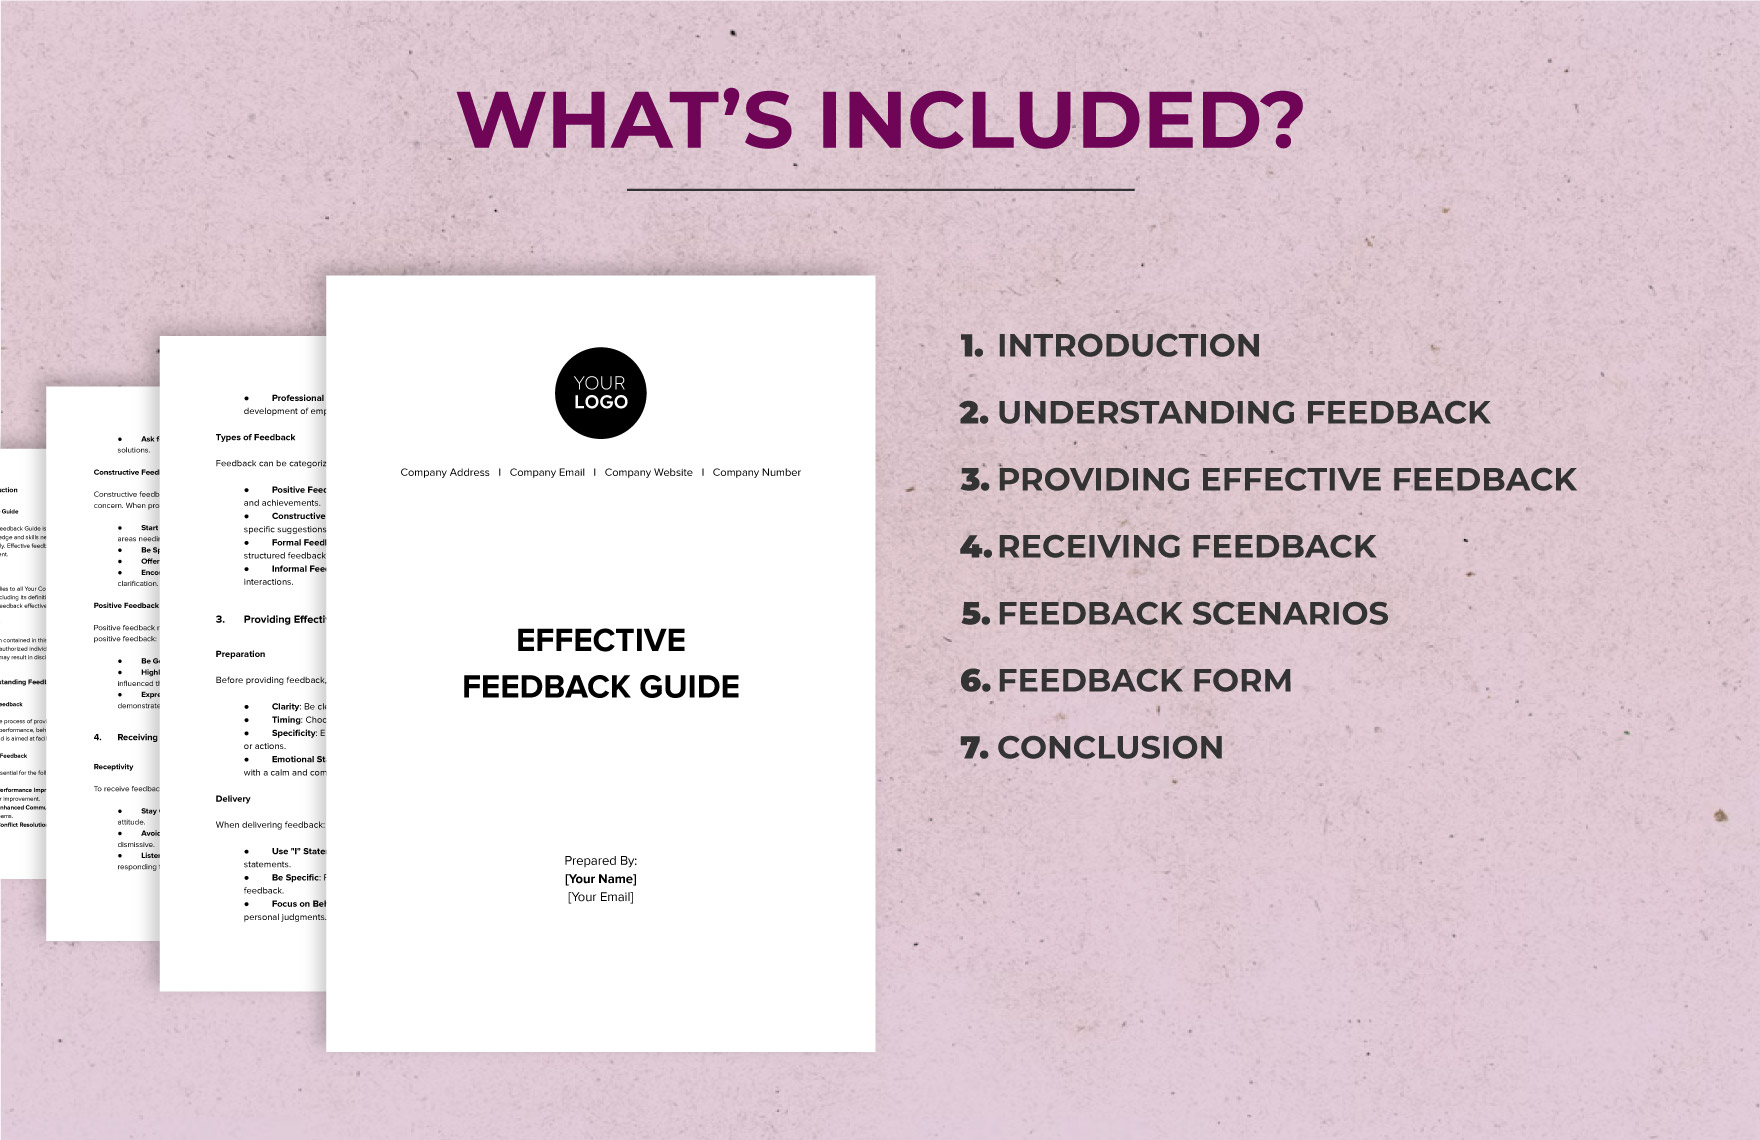 Effective Feedback Guide HR Template